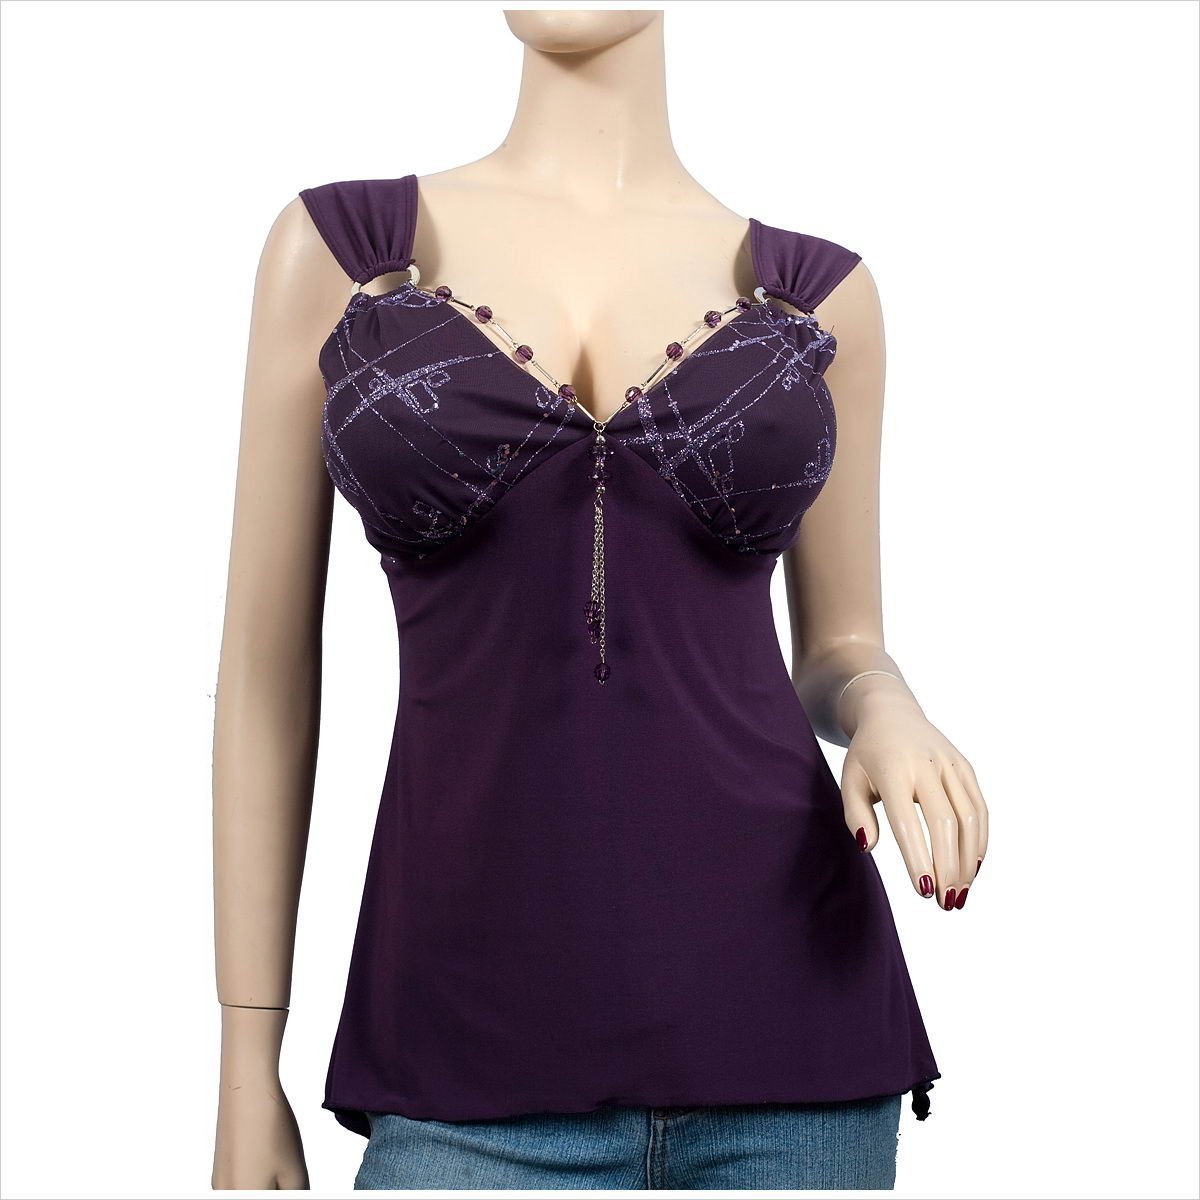 Sexy Plus Size Womens Clothing 97